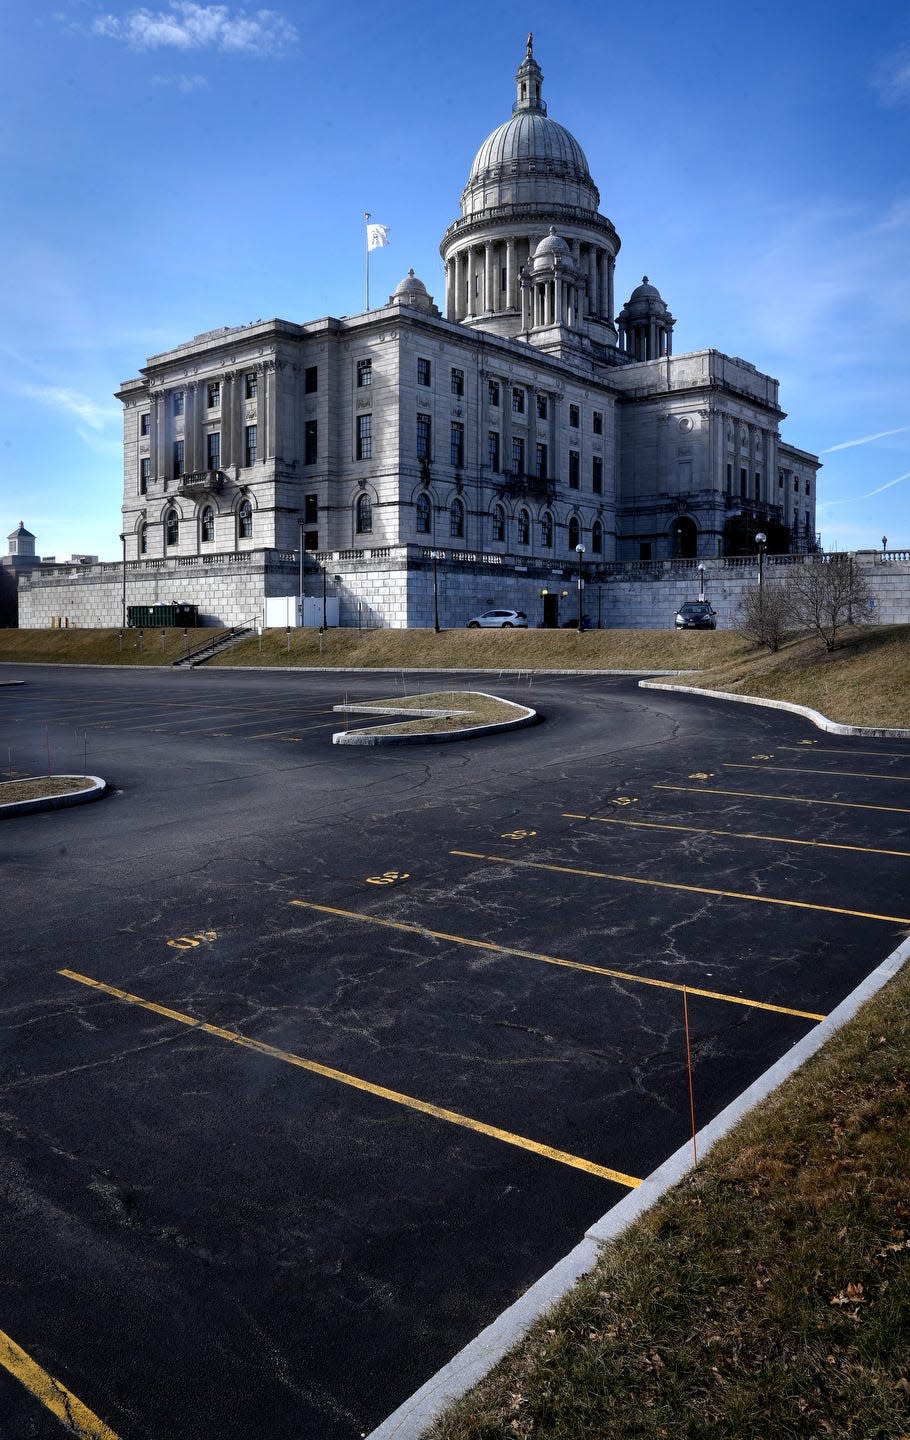 The Rhode Island State House in Providence.